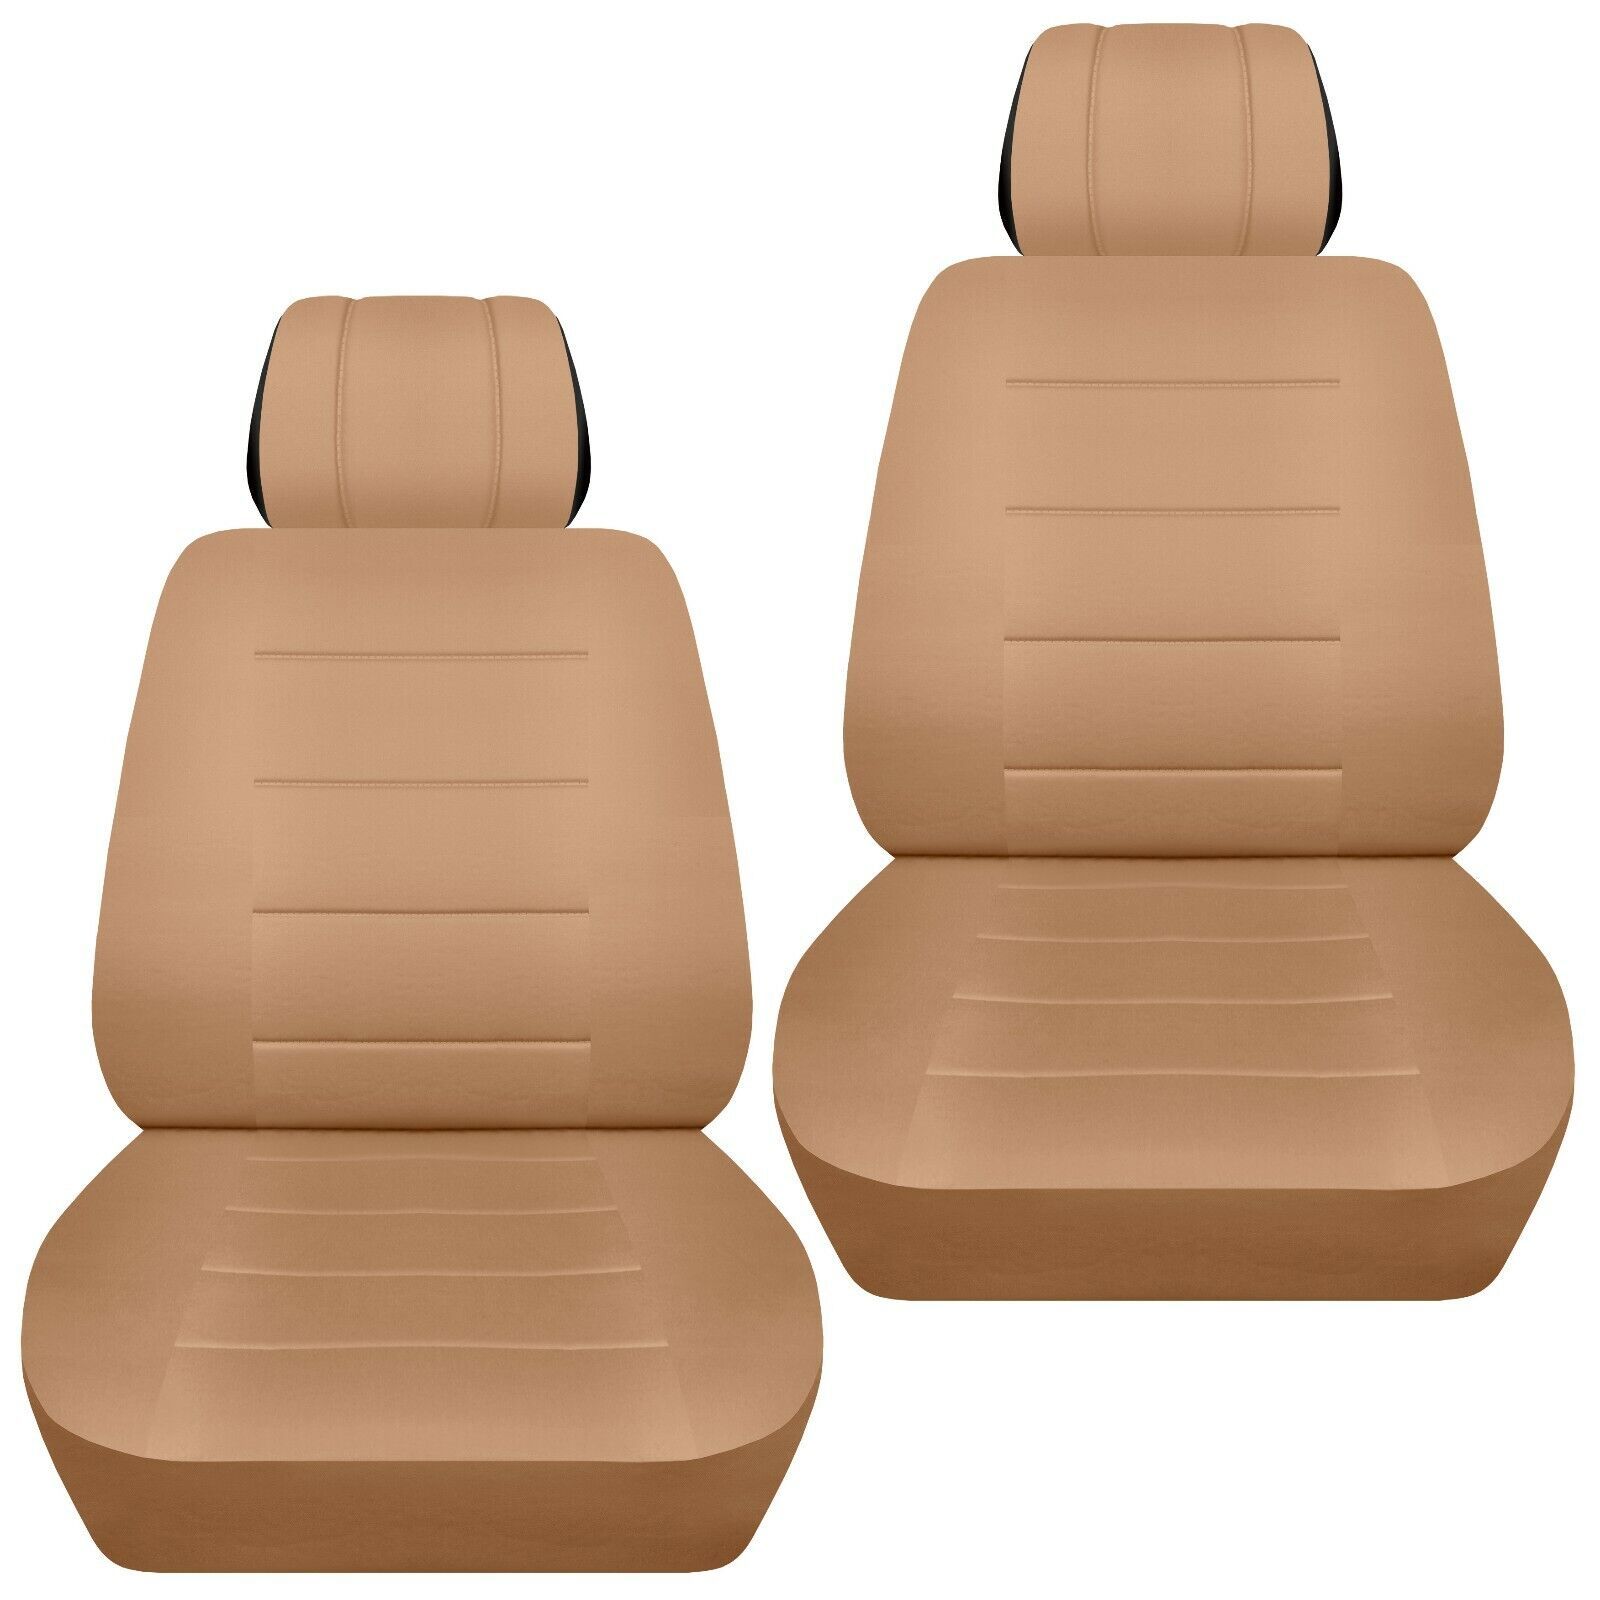 Primary image for Front set car seat covers fits 2002-2020 Honda Pilot     solid tan